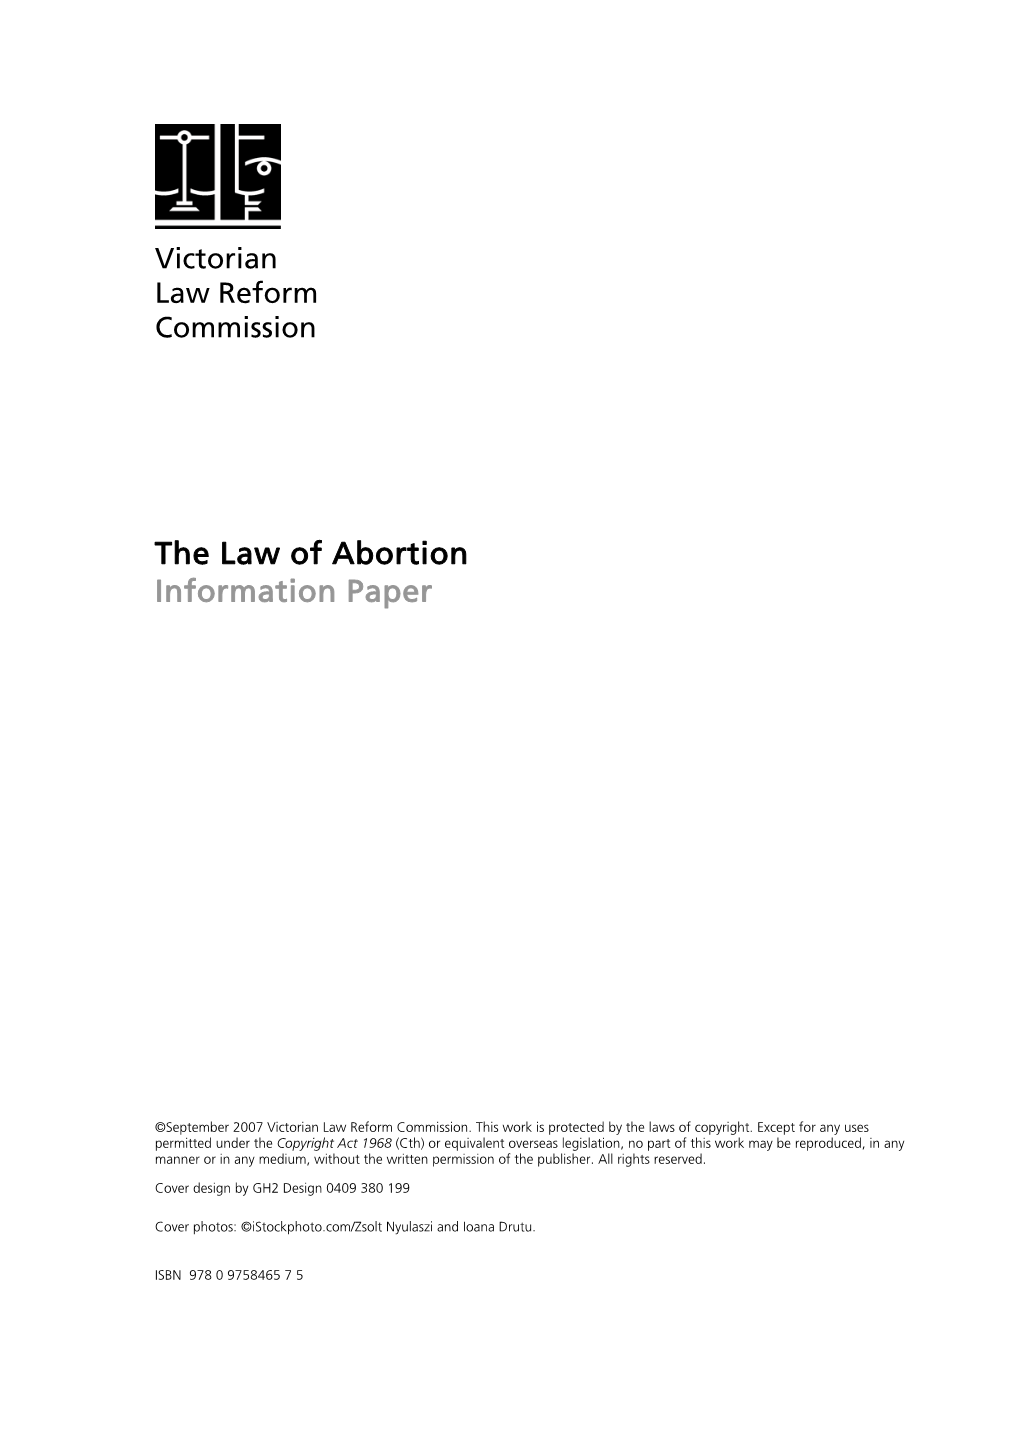 The Law of Abortion Information Paper